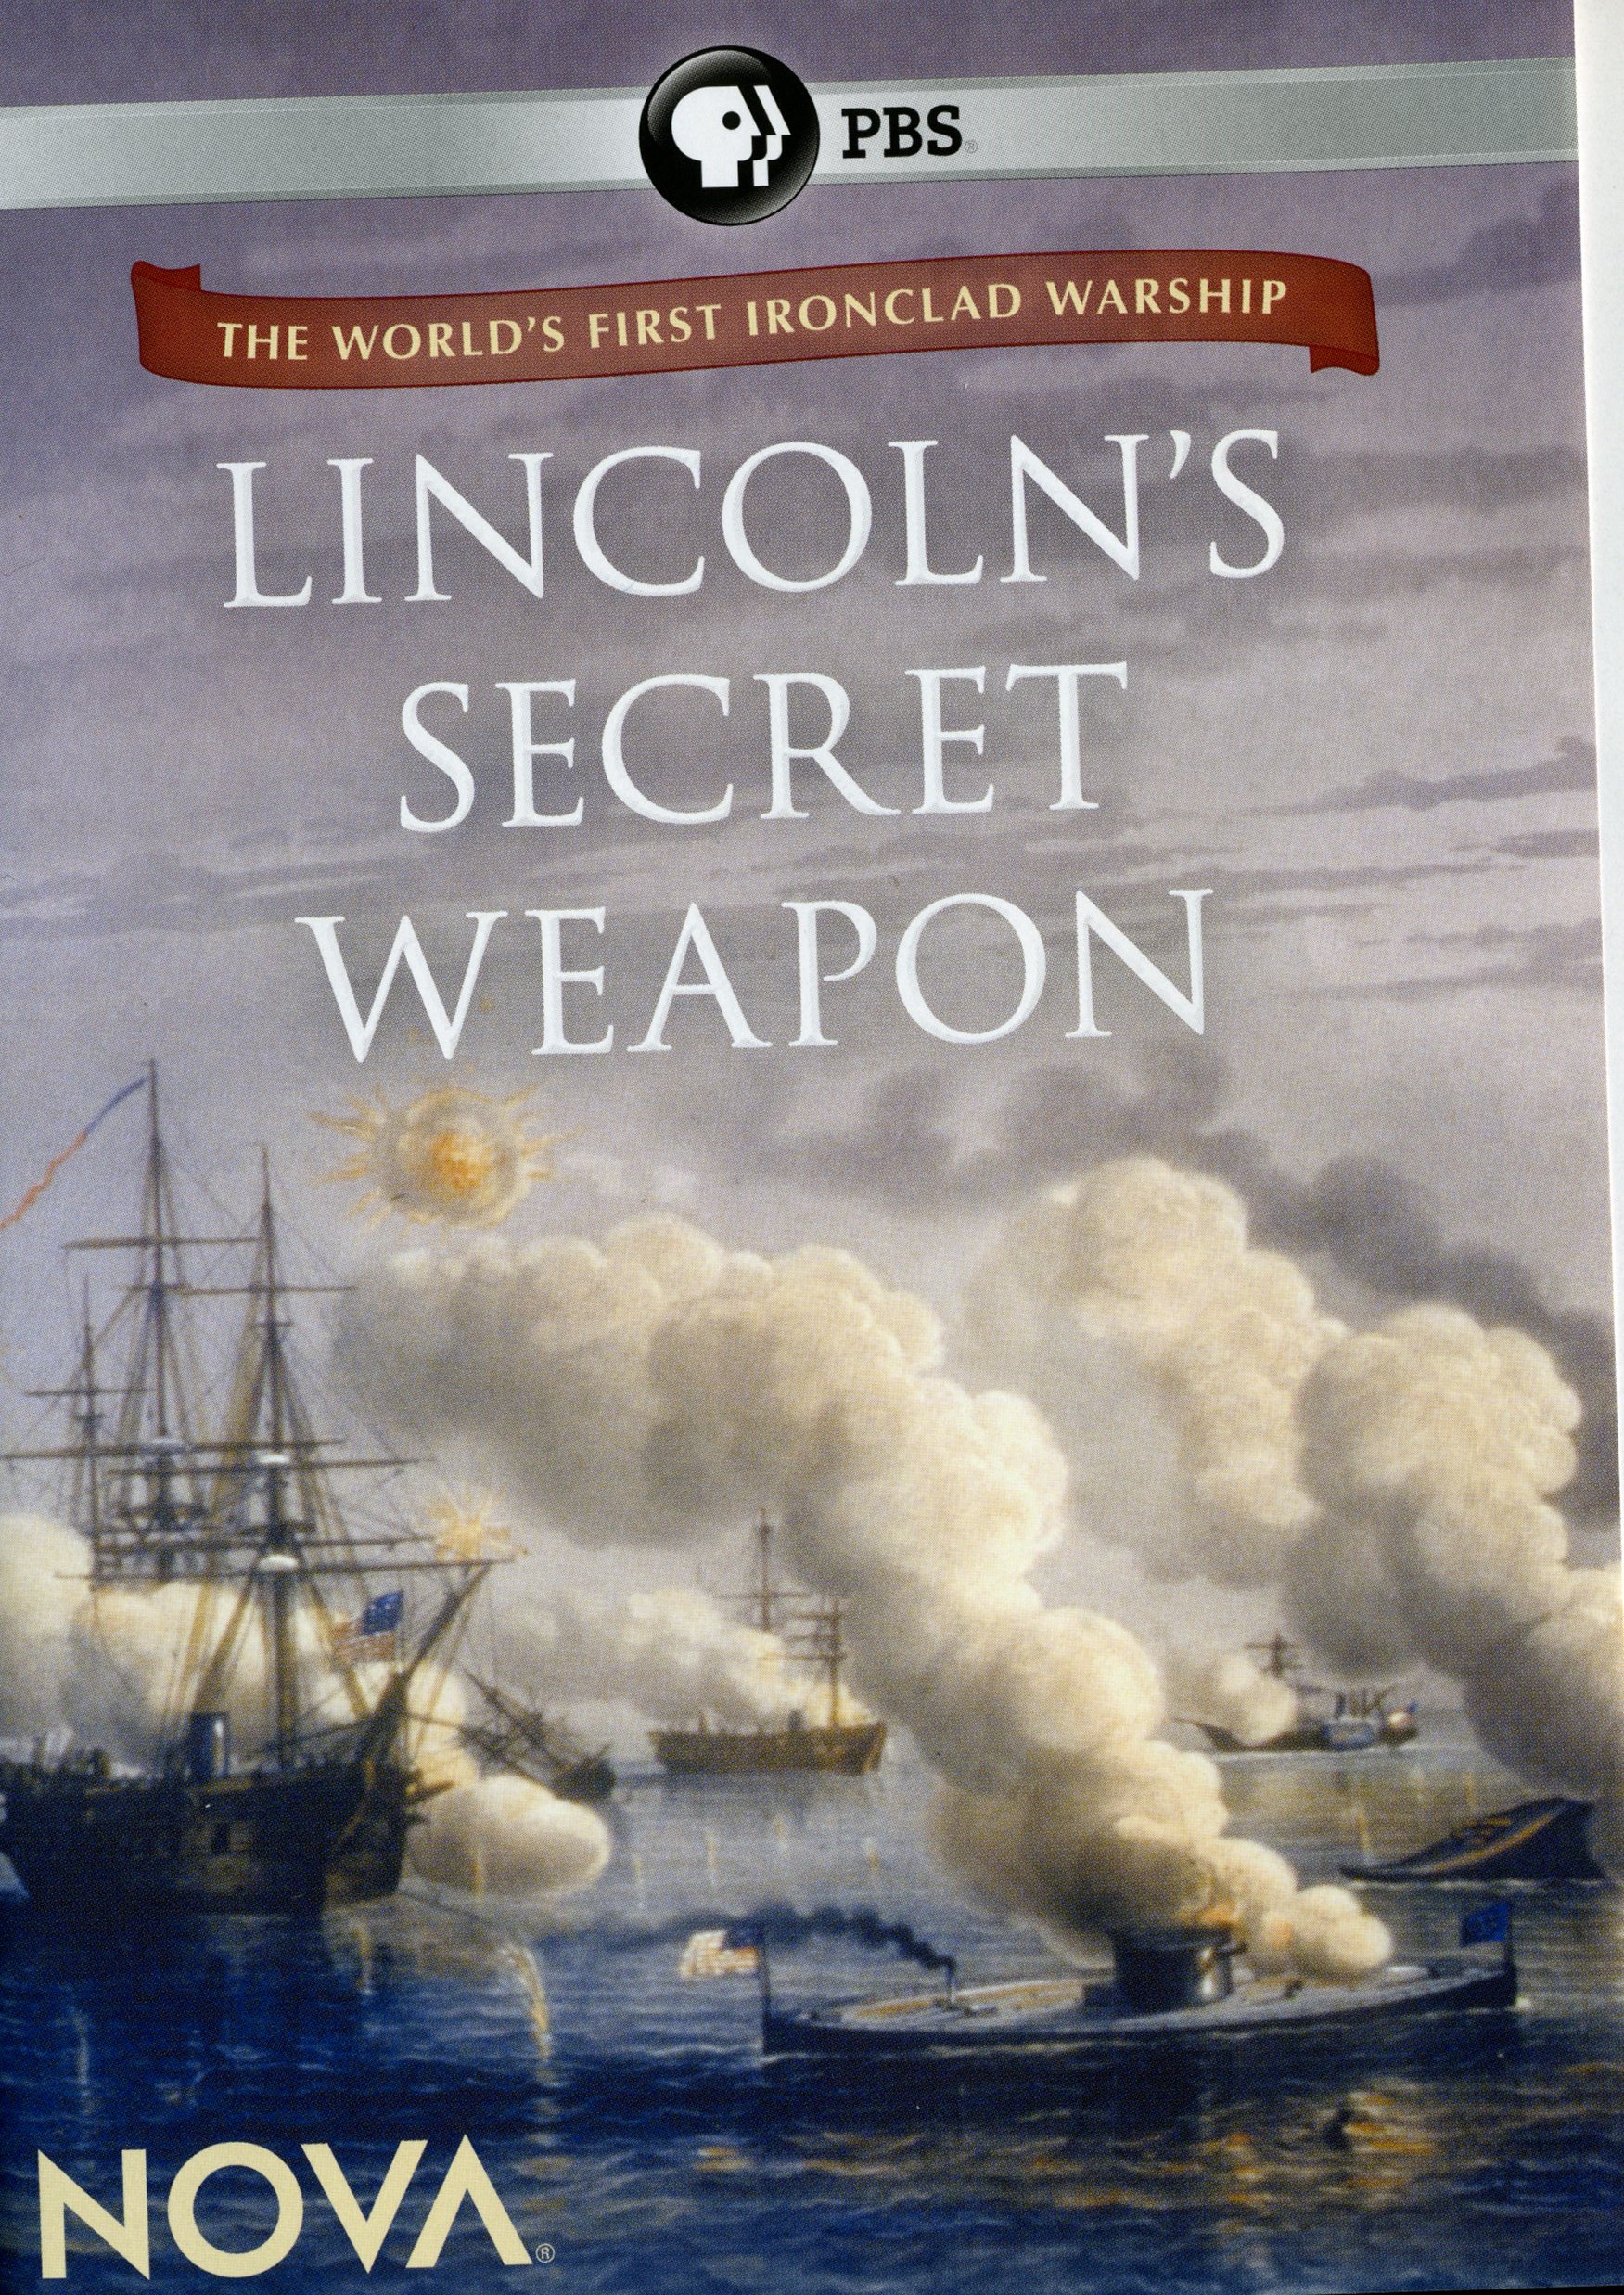 cover of dvd titled Lincoln's Secret Weapon with image of boats smoldering on ocean